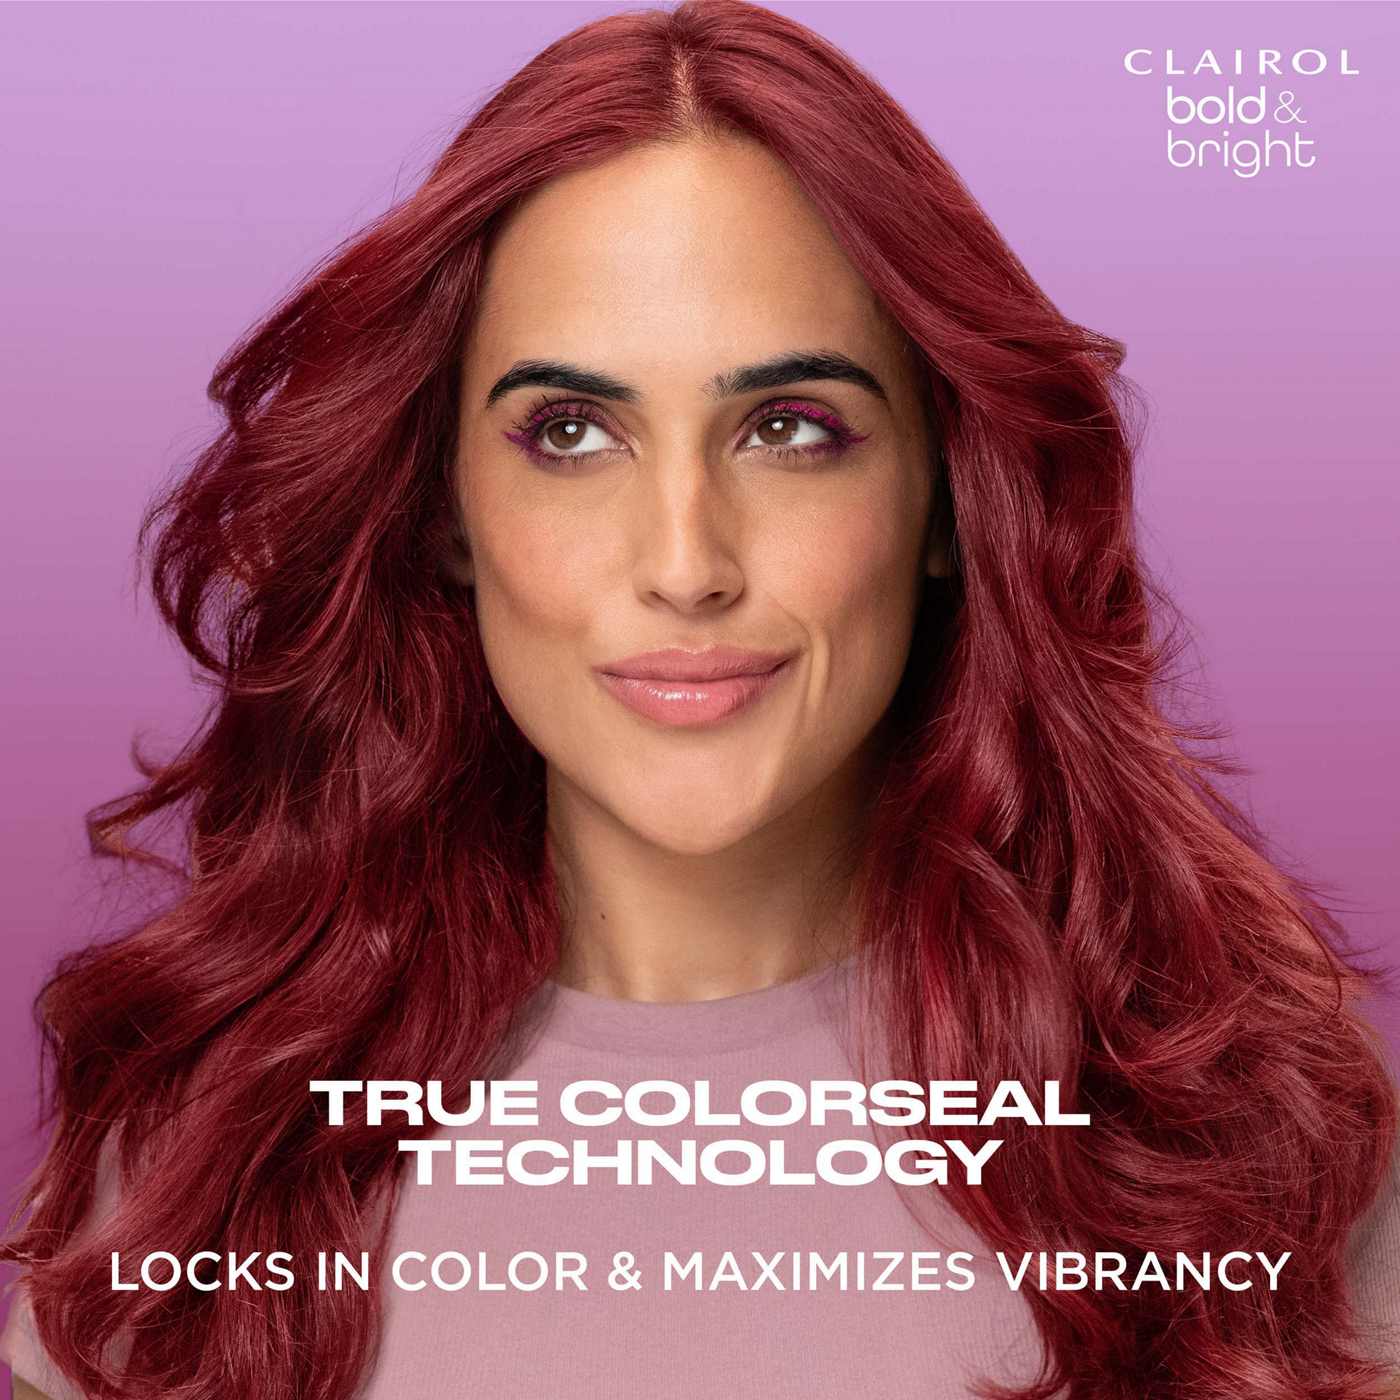 Clairol Bold & Bright Permanent Hair Color - 40 Cafecito; image 11 of 11